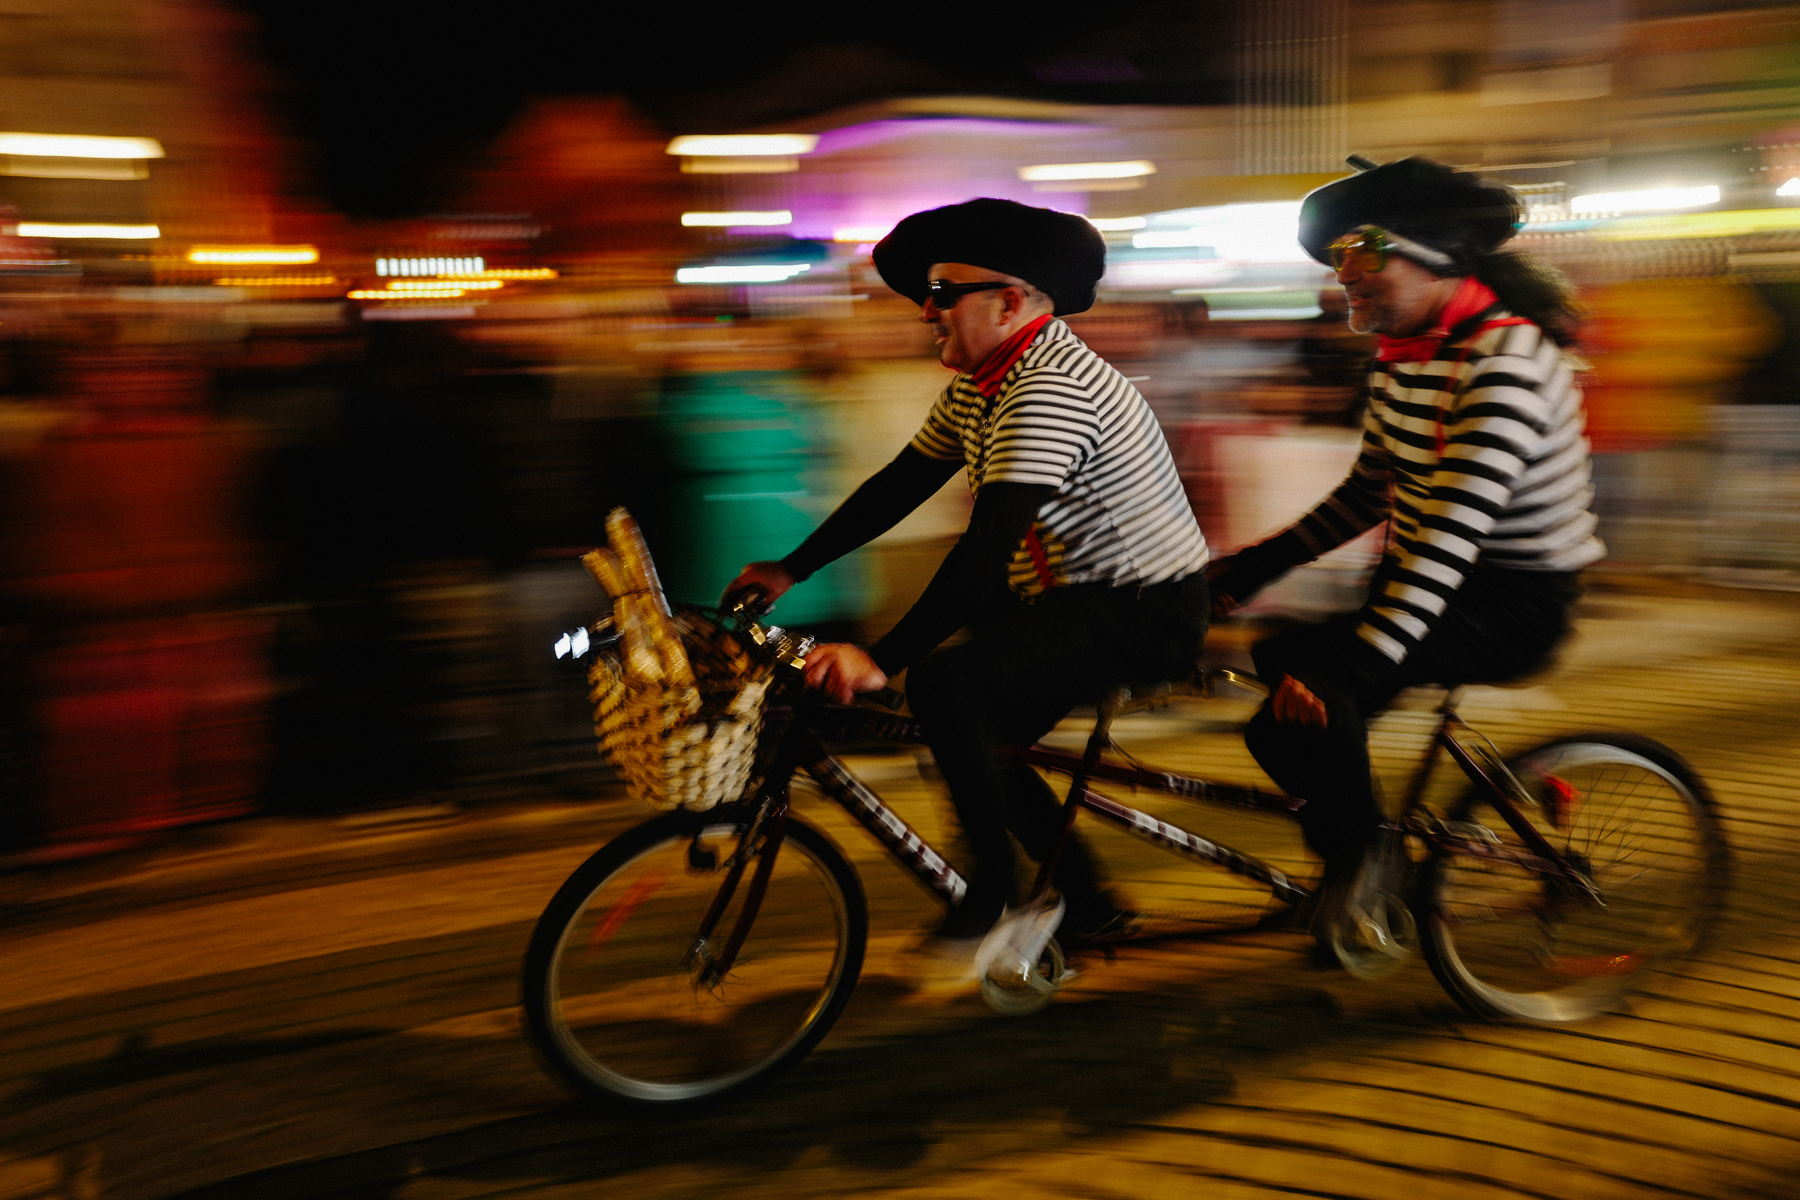 Two people in striped shirts and berets riding a tandem bicycle at night, with motion blur emphasizing speed and urban nightlife in the background.